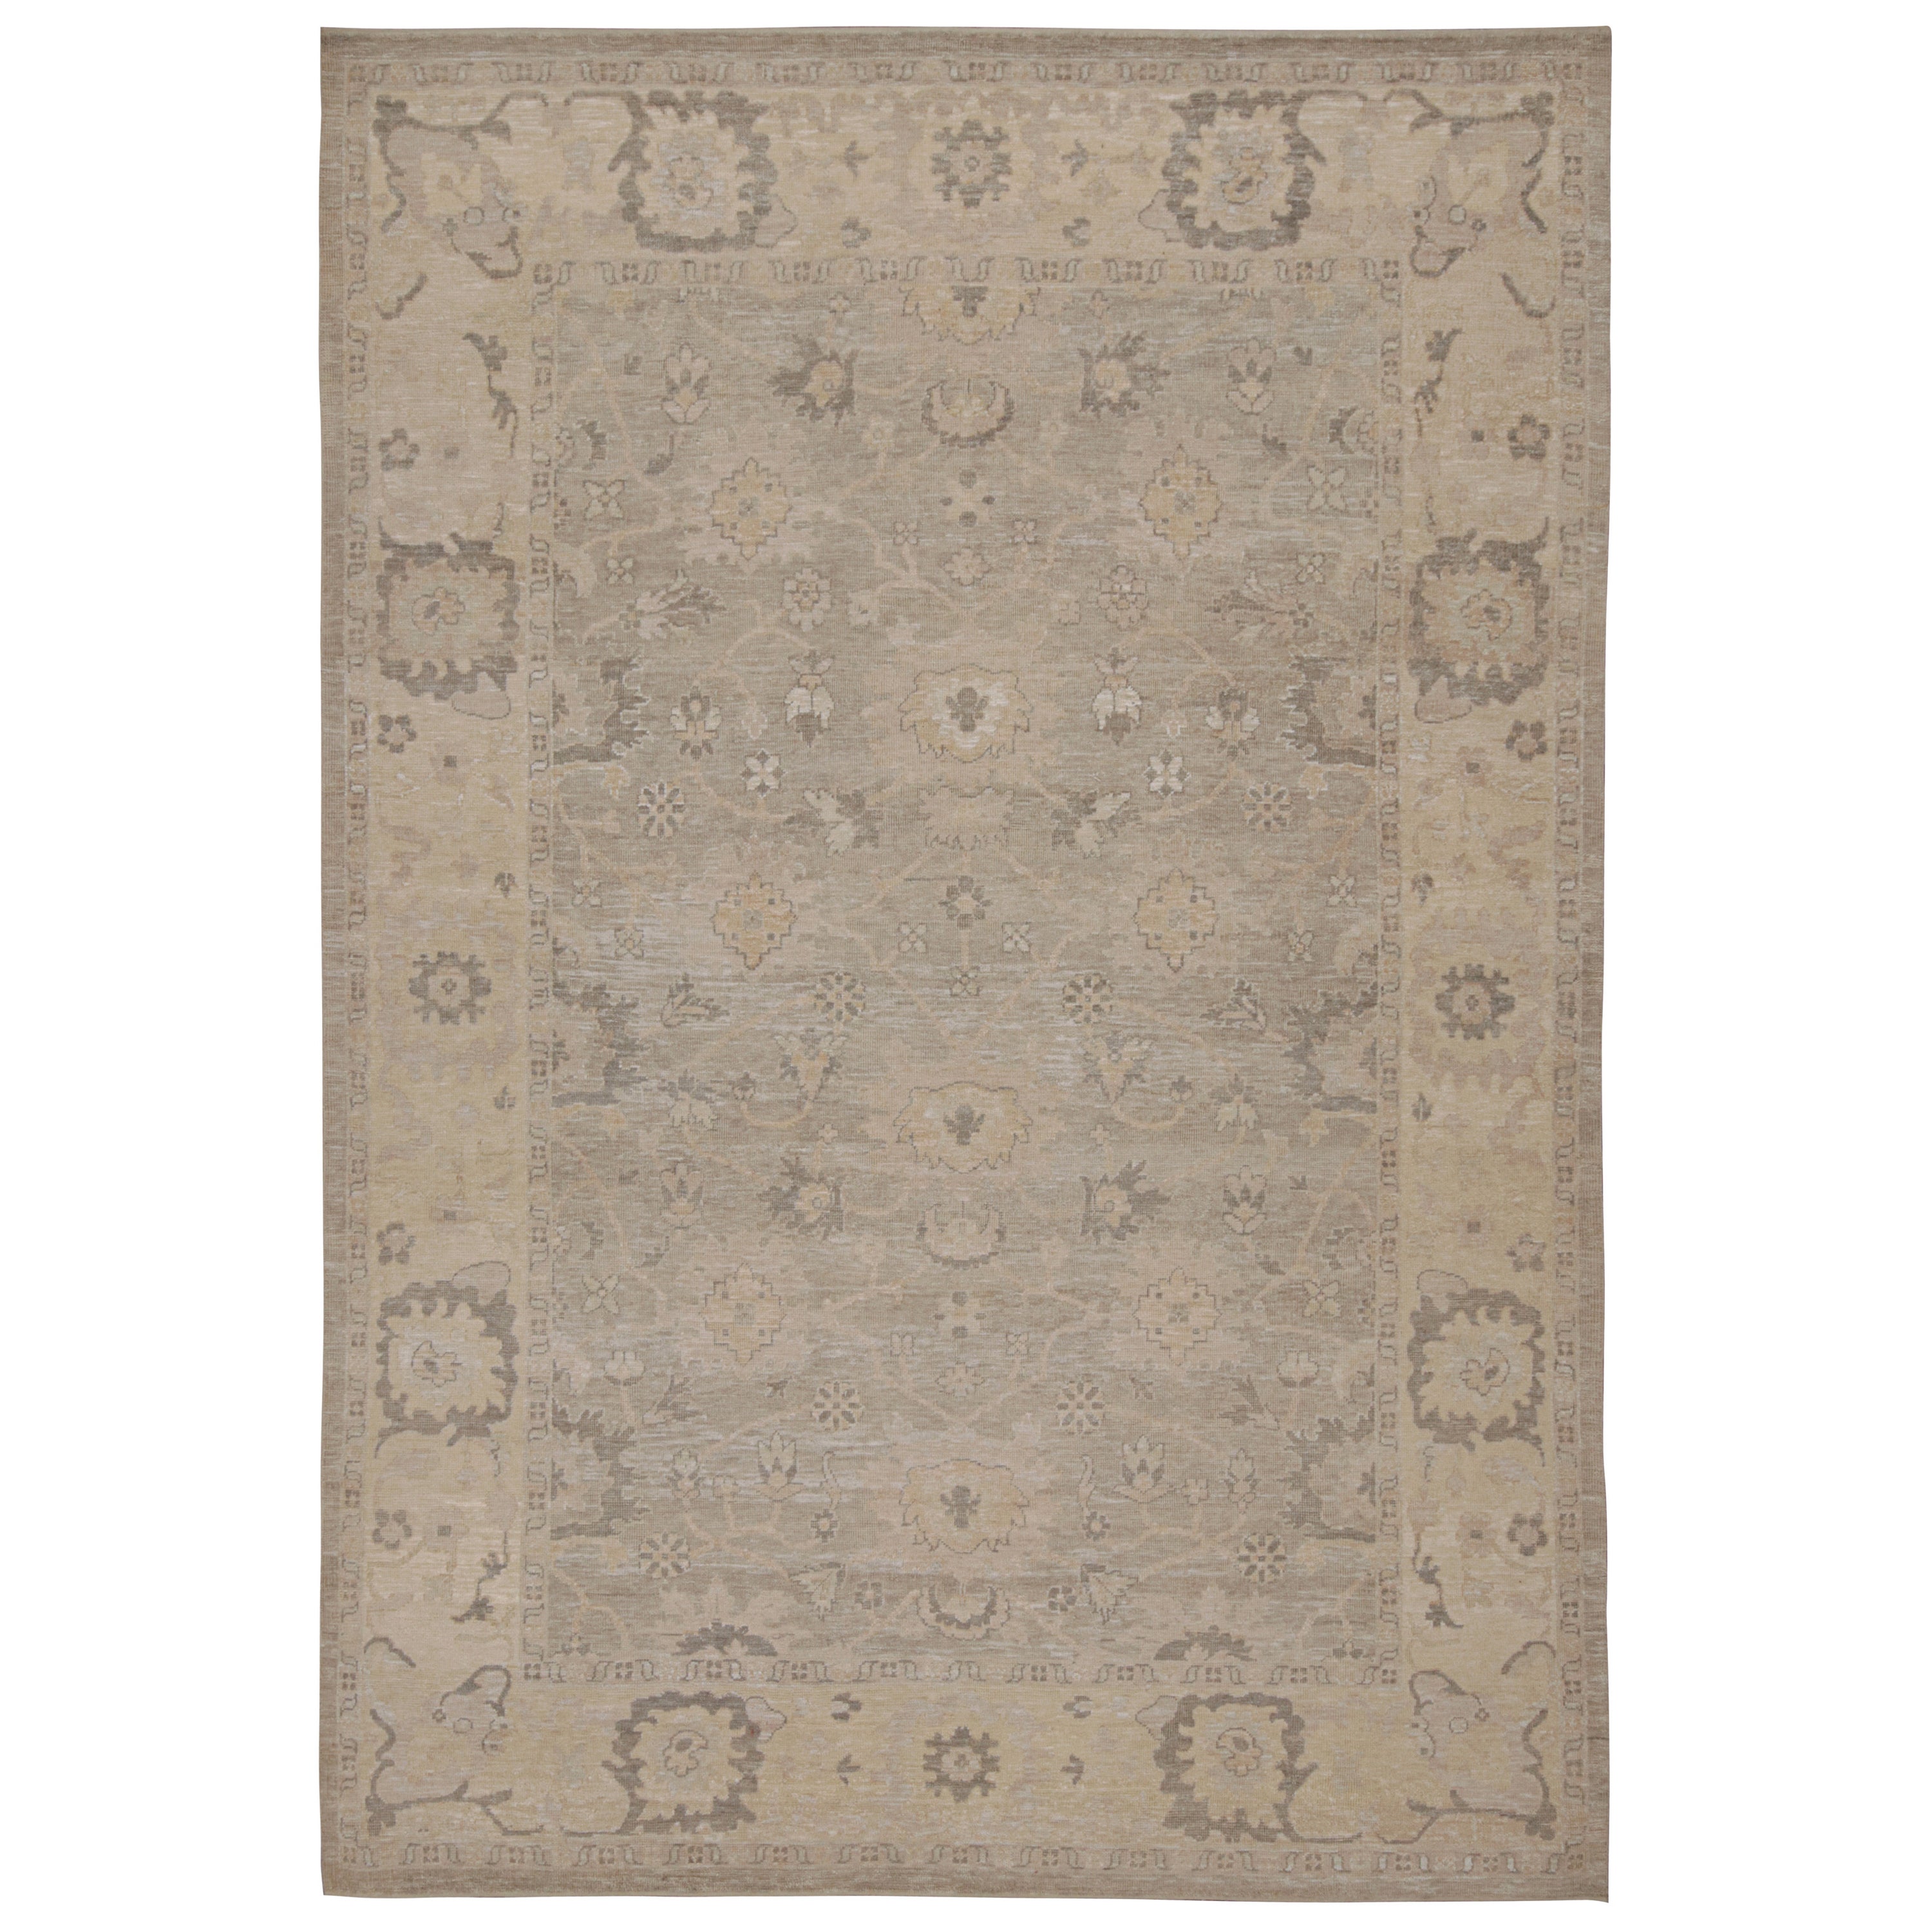 Rug & Kilim’s Oushak Style Rug in Gray & Beige Floral Patterns For Sale